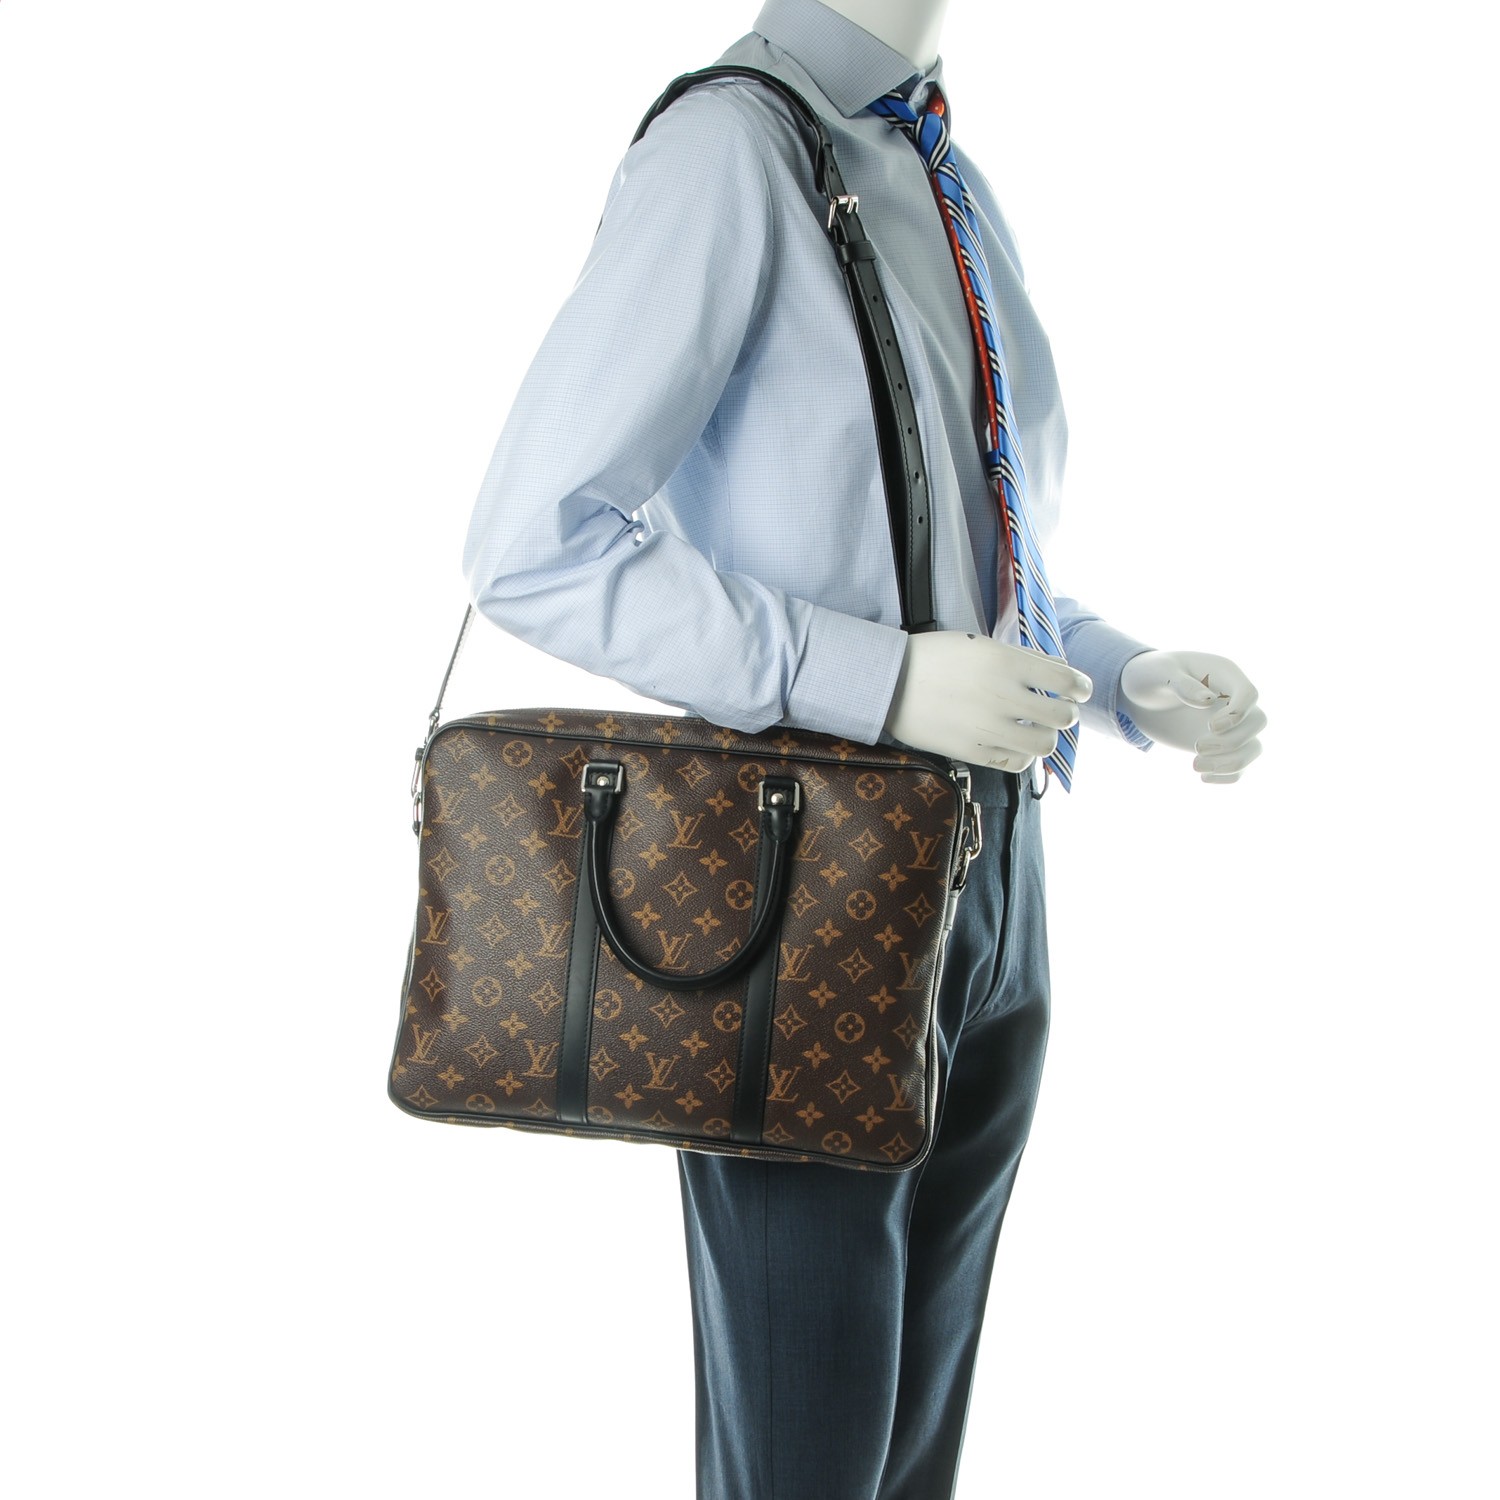 Louis Vuitton Porte-Documents Voyage PM What's in my bag?